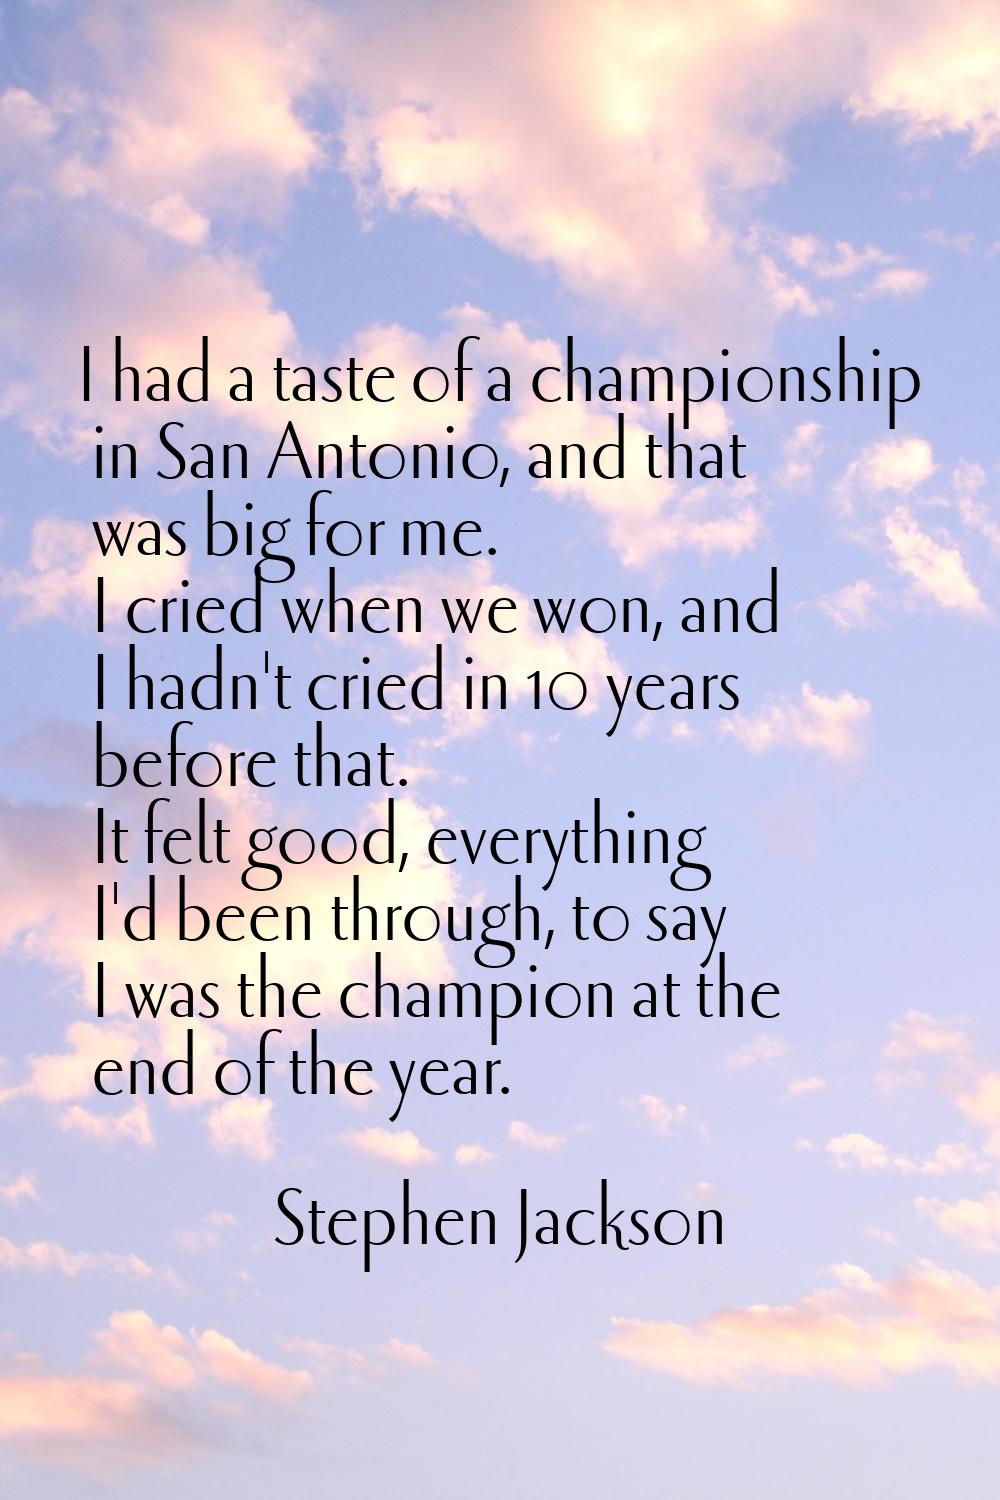 I had a taste of a championship in San Antonio, and that was big for me. I cried when we won, and I